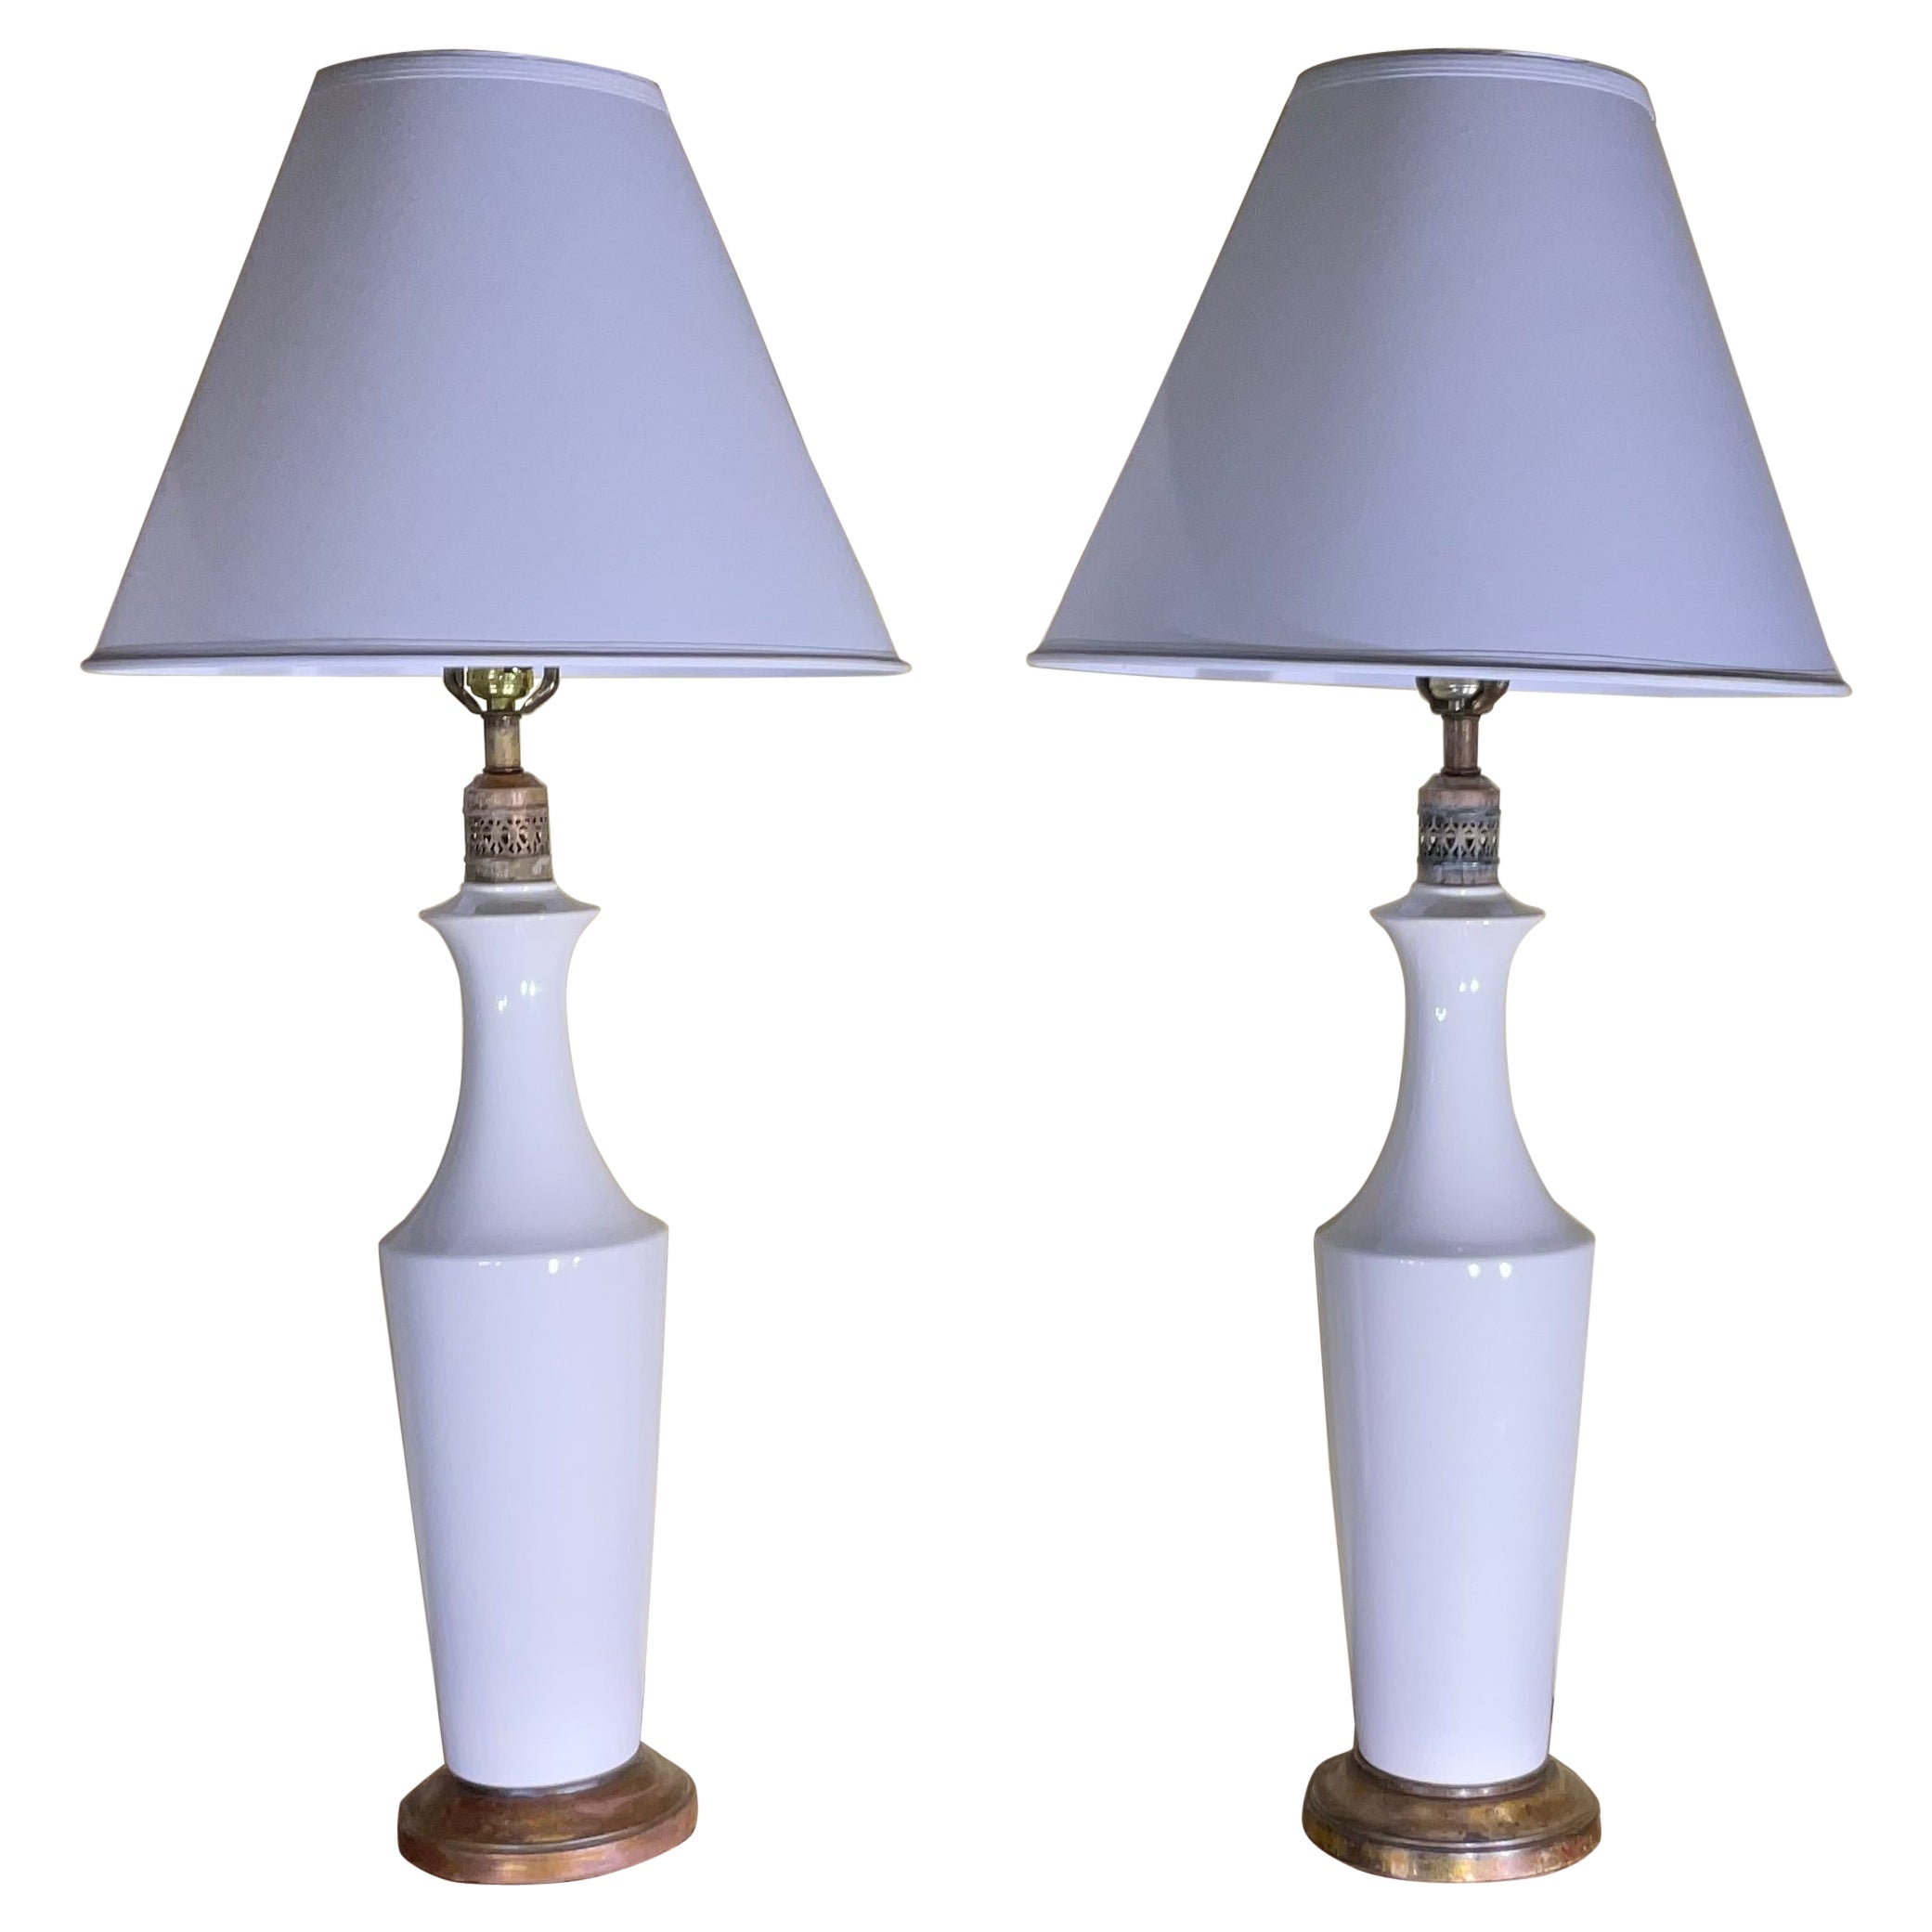 Pair of White Ceramic Table Lamp For Sale